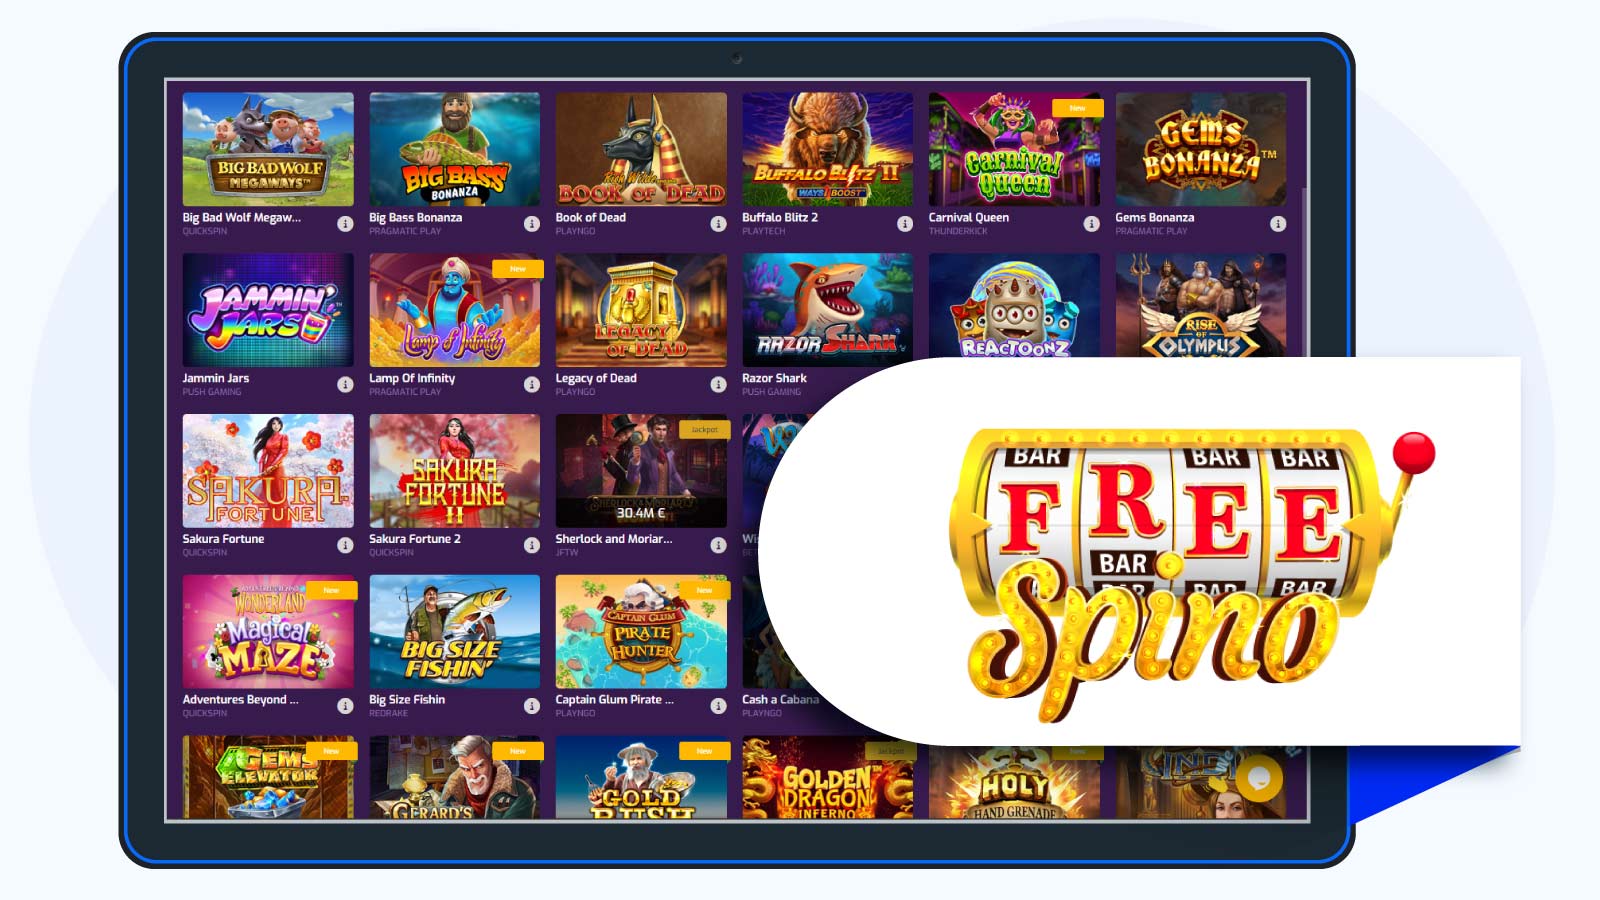 FreeSpino Casino – The biggest cashout available at a Casino